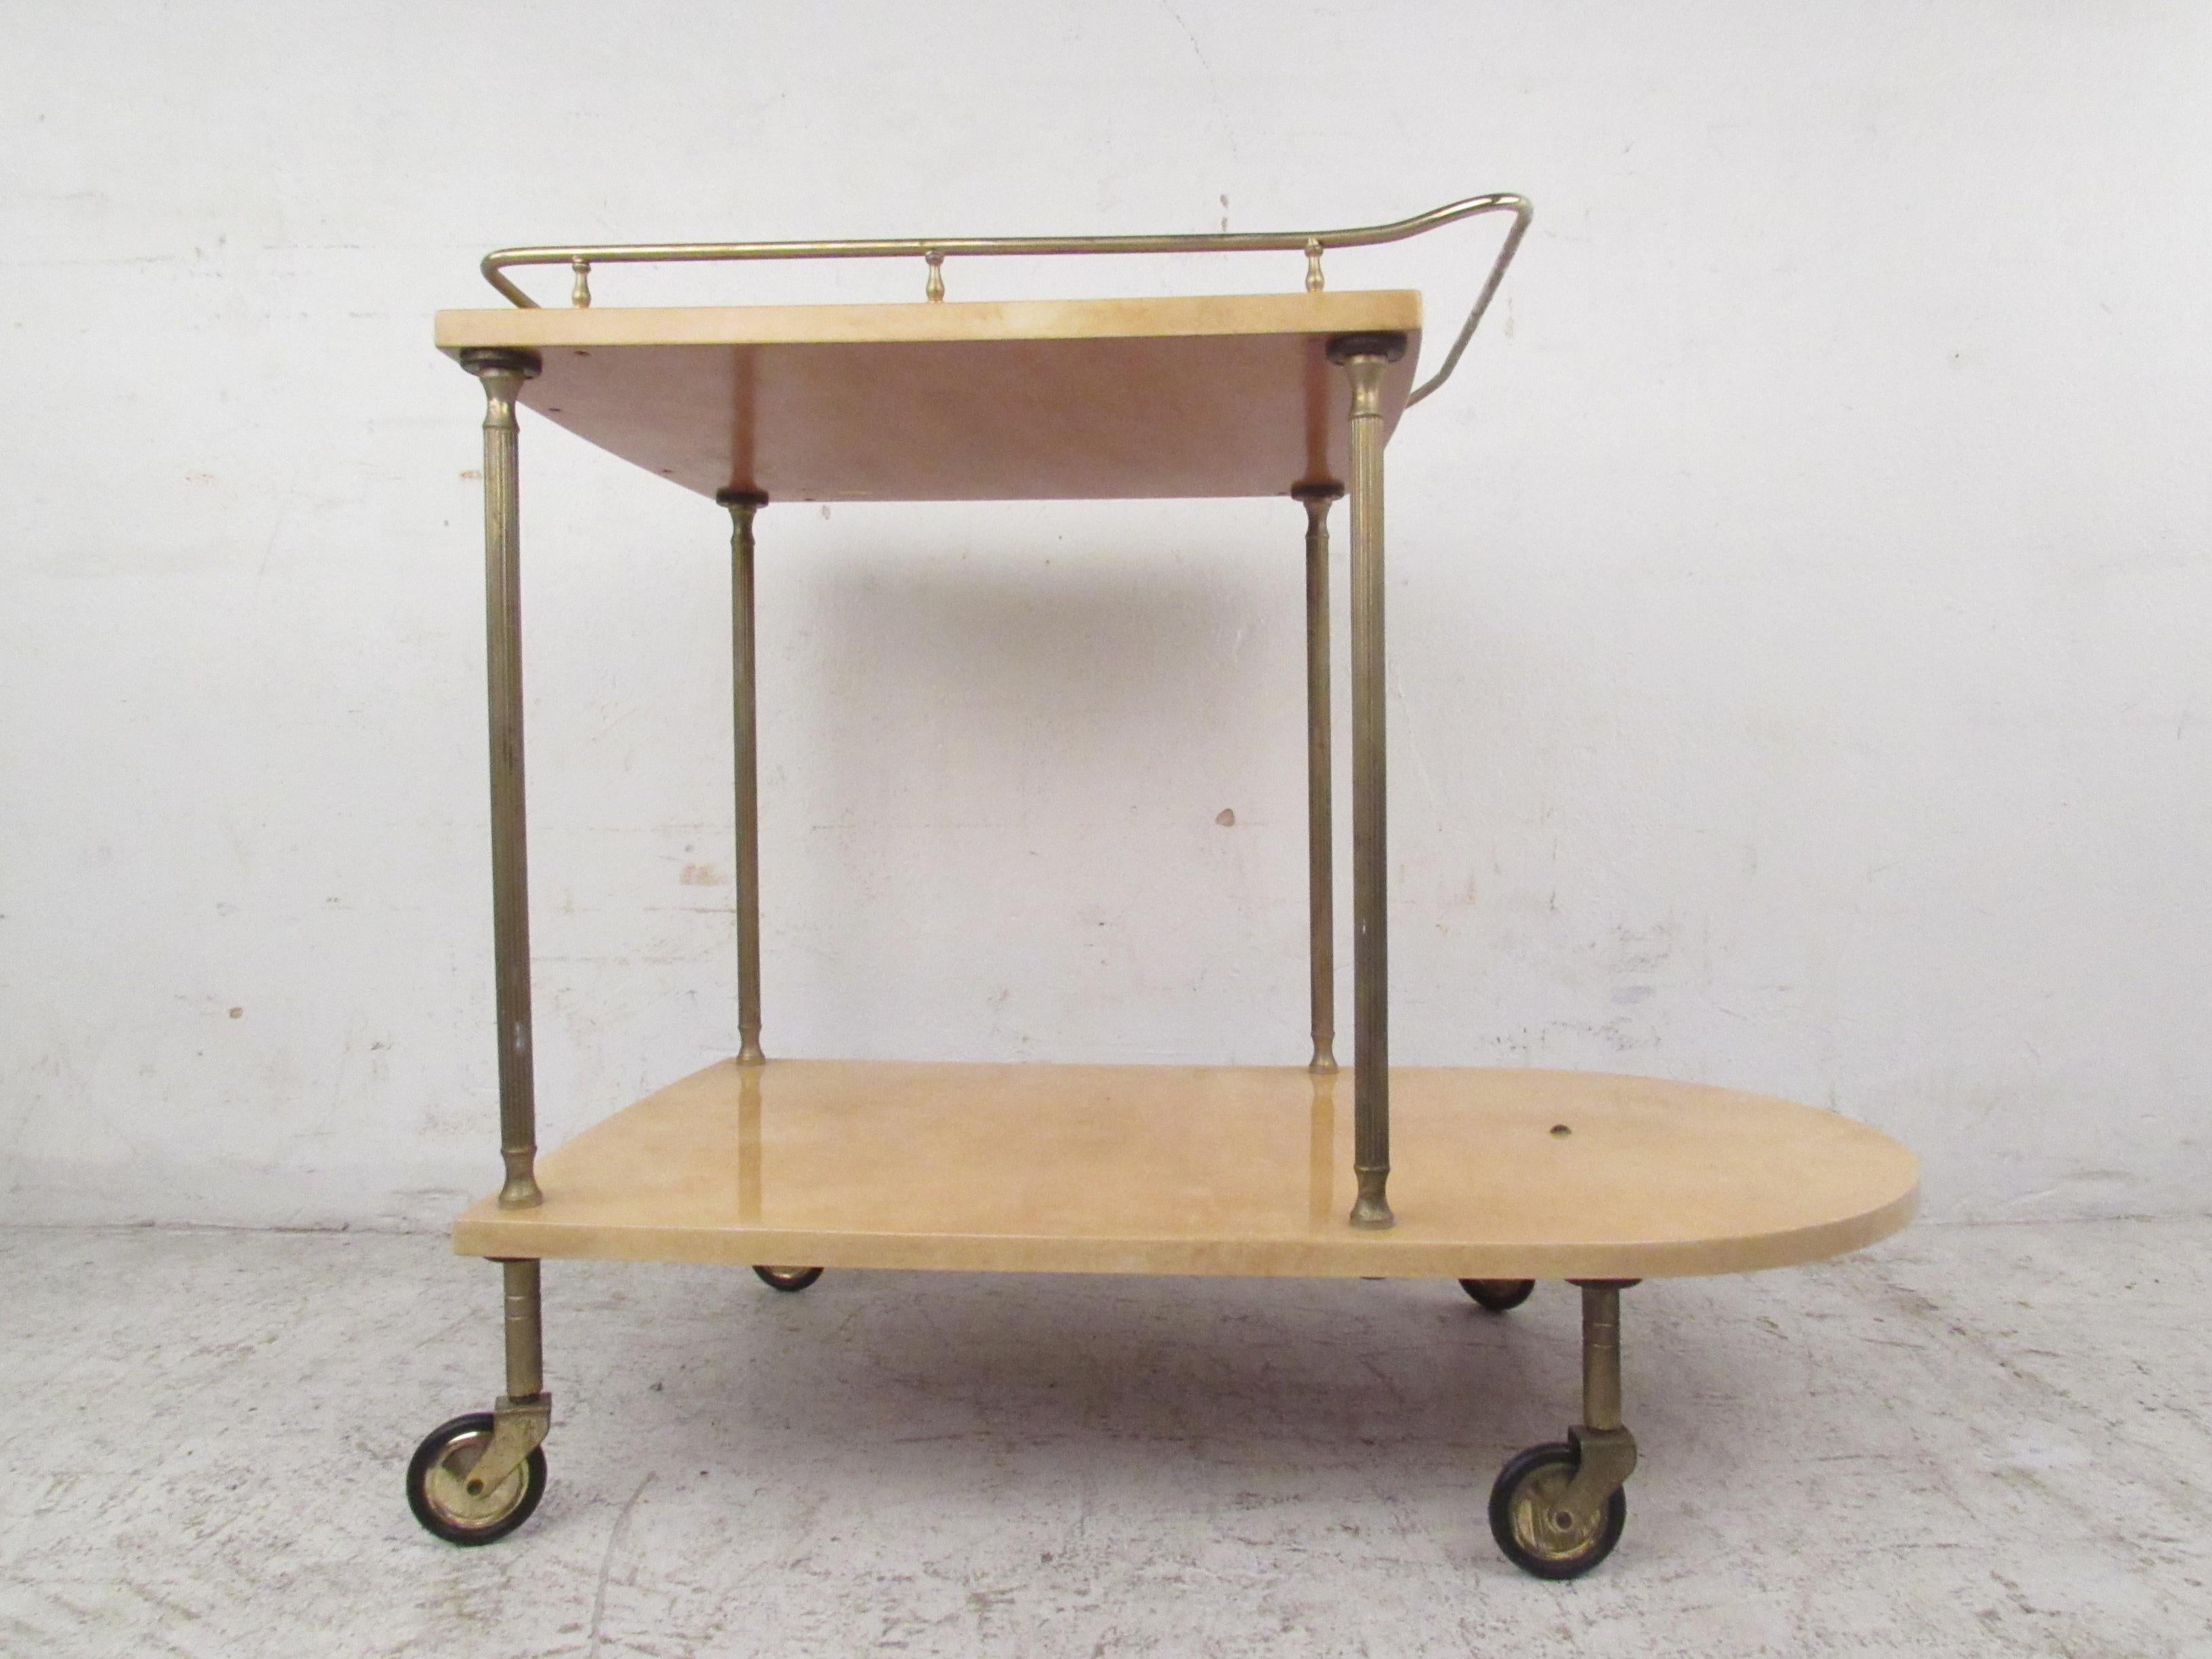 This stunning vintage modern bar cart boasts a gorgeous cream colored goatskin and brass fixtures. The elegant lacquered goatskin and decorative supports add to the midcentury appeal. This sleek two tier serving cart makes the perfect addition to